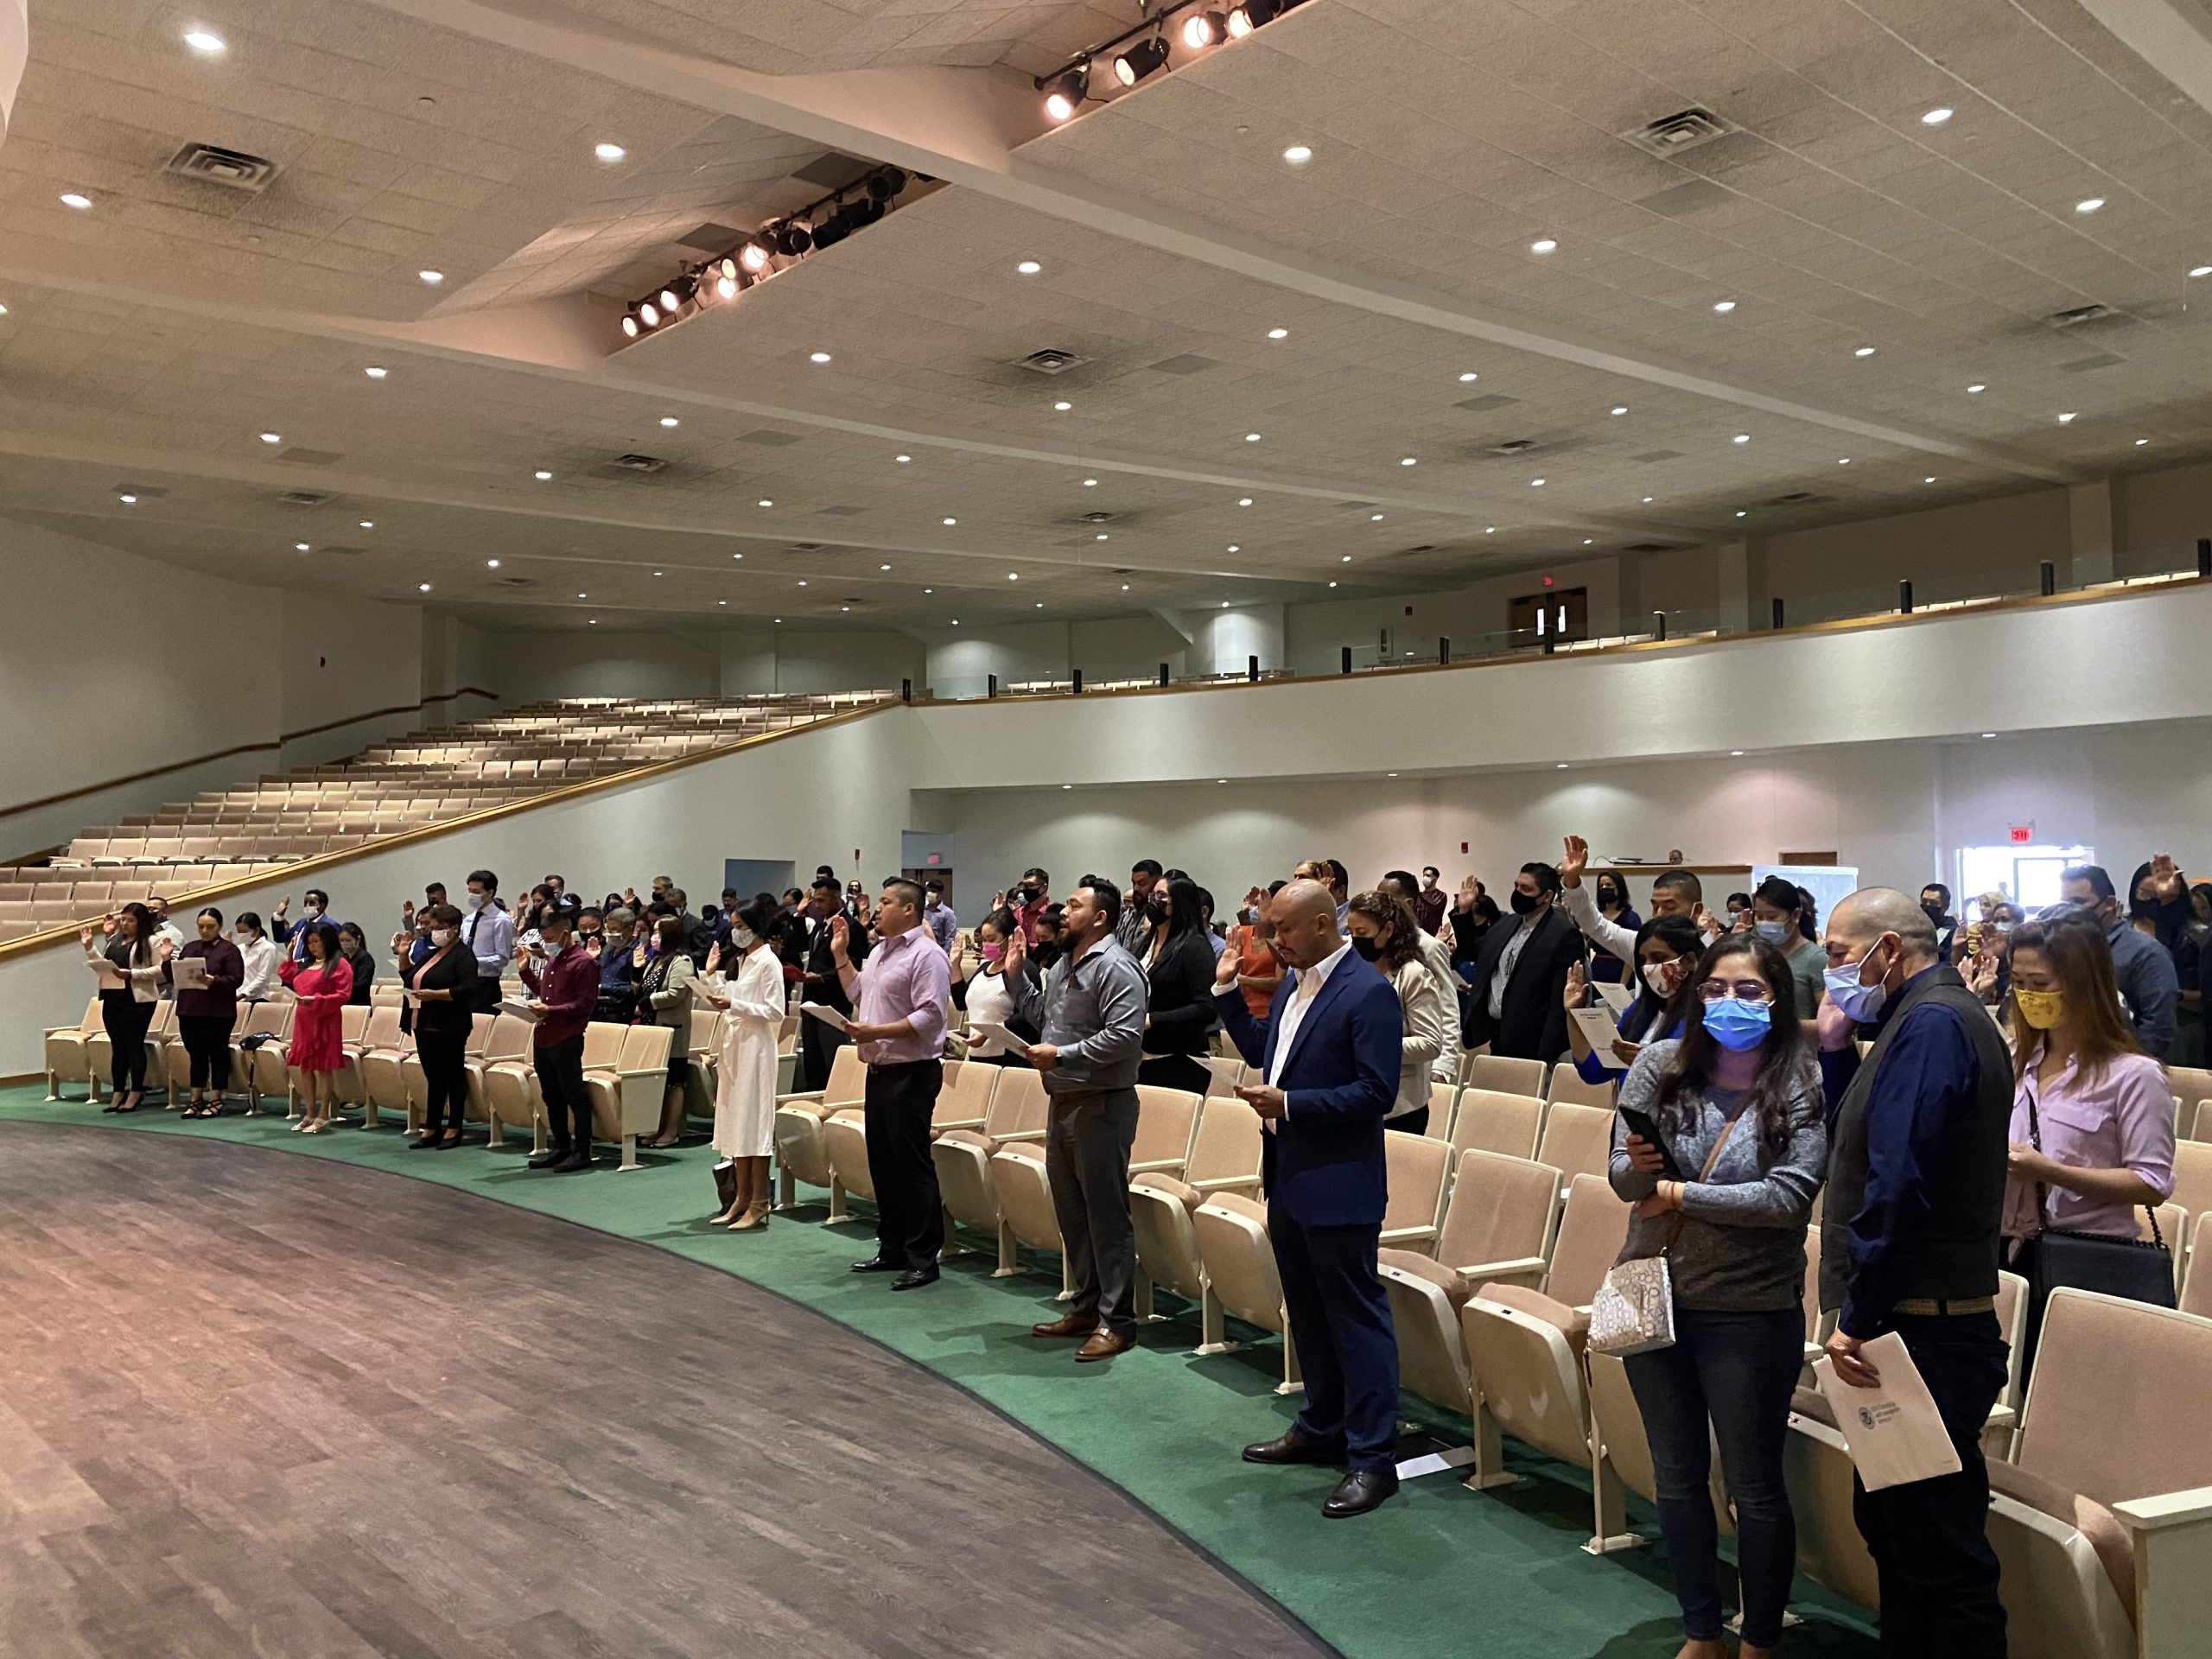 New US Citizens to Take the Oath of Allegiance